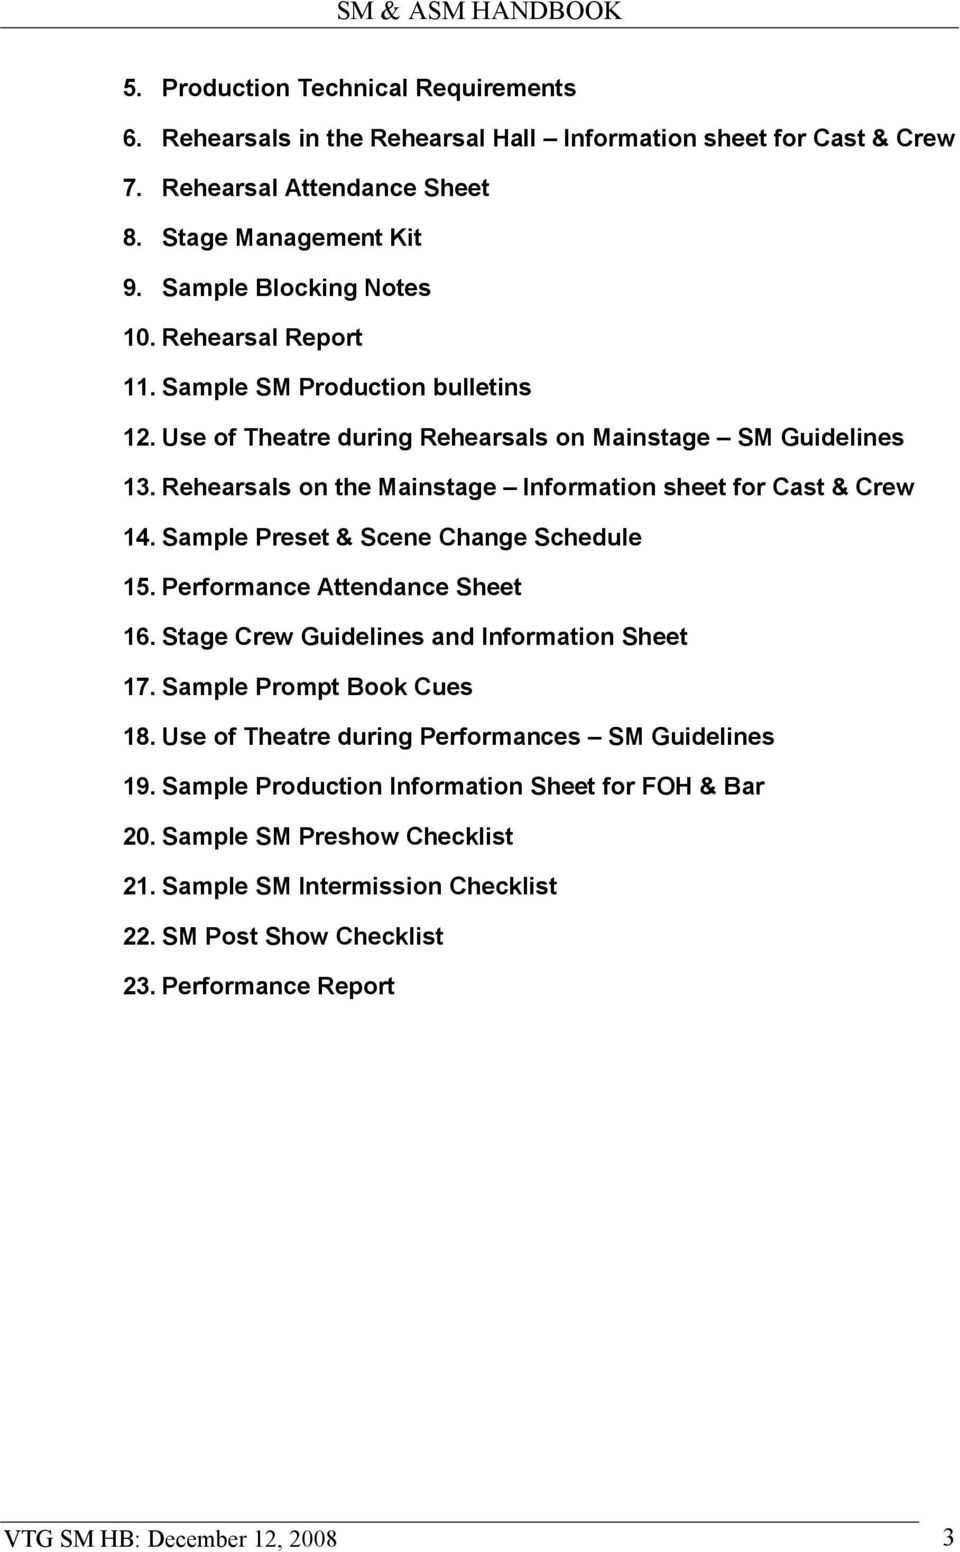 Stage Manager & Assistant Stage Manager Handbook - Pdf Free Pertaining To Rehearsal Report Template